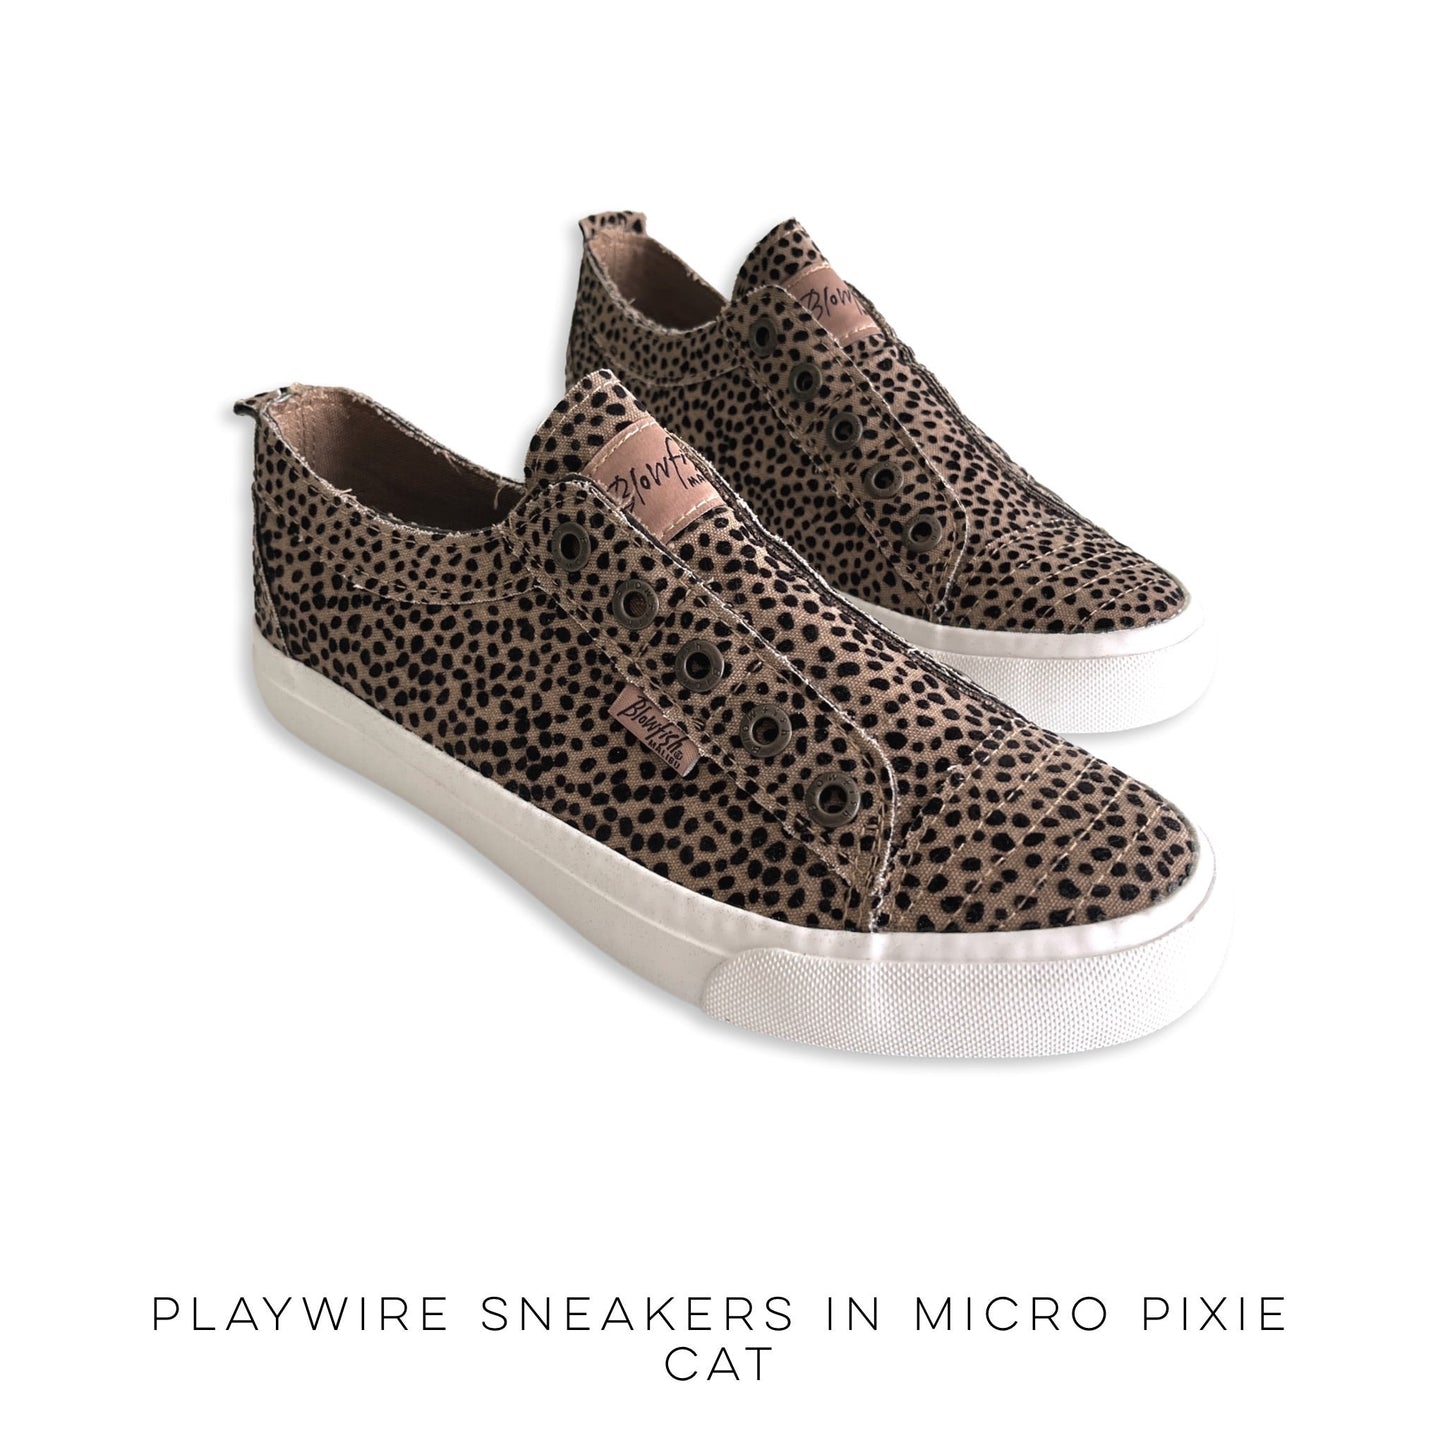 Playwire Sneakers in Micro Pixie Cat